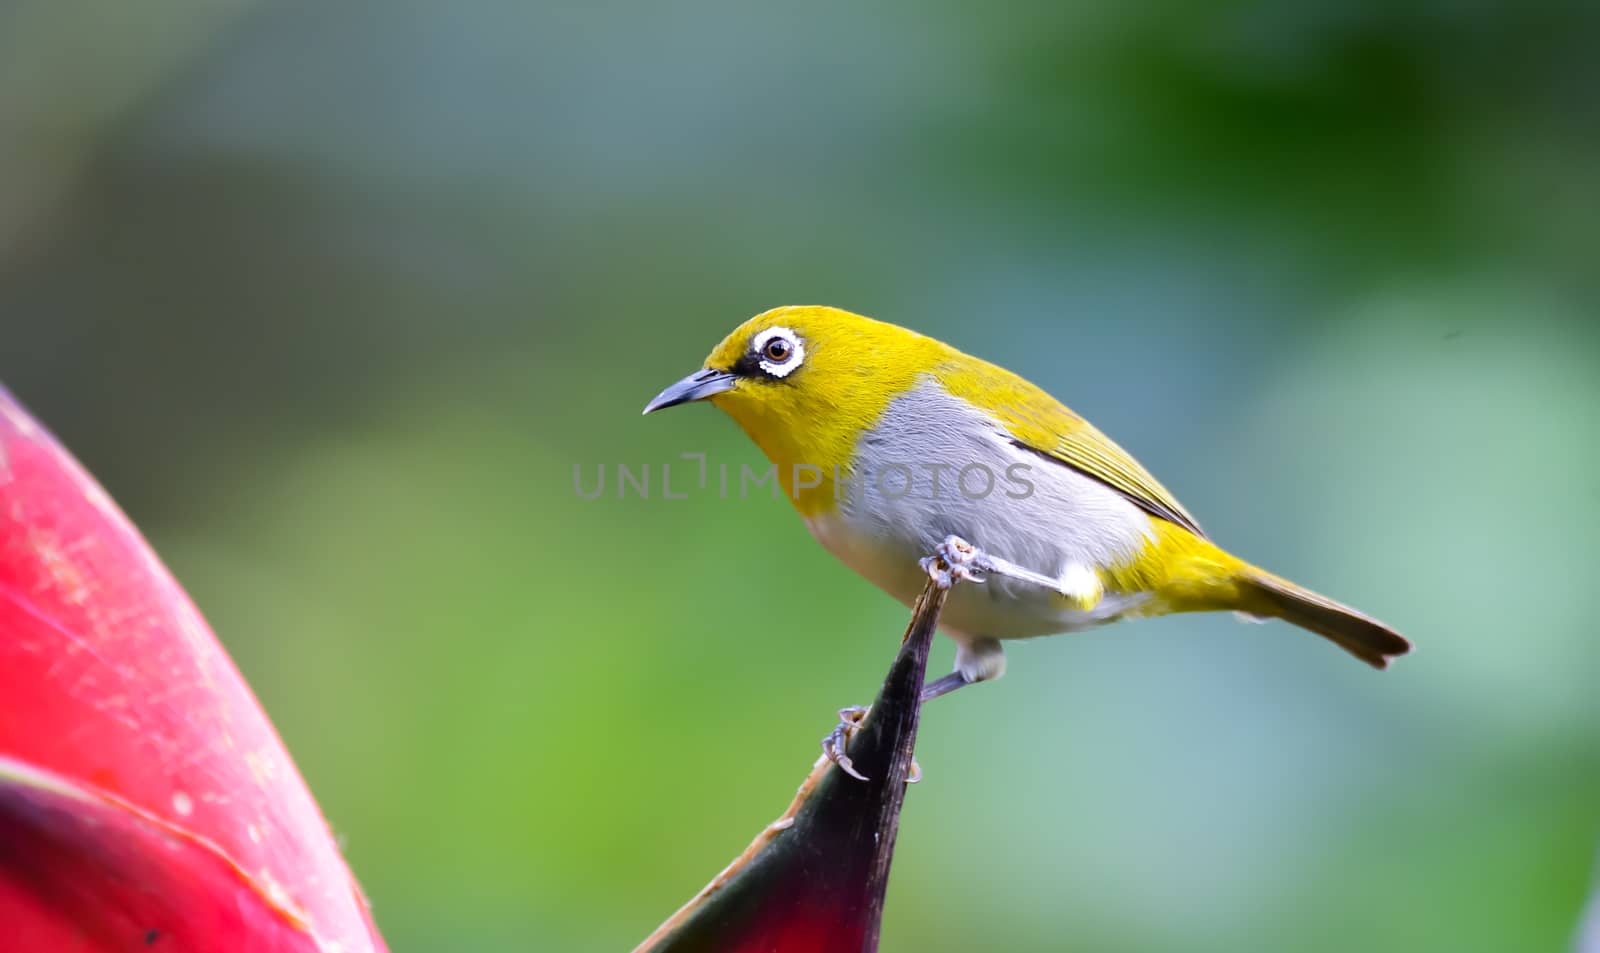 Oriental white-eye: Hyperactive little yellow bird with an off-white belly and white spectacles. Found in a wide range of habitats.